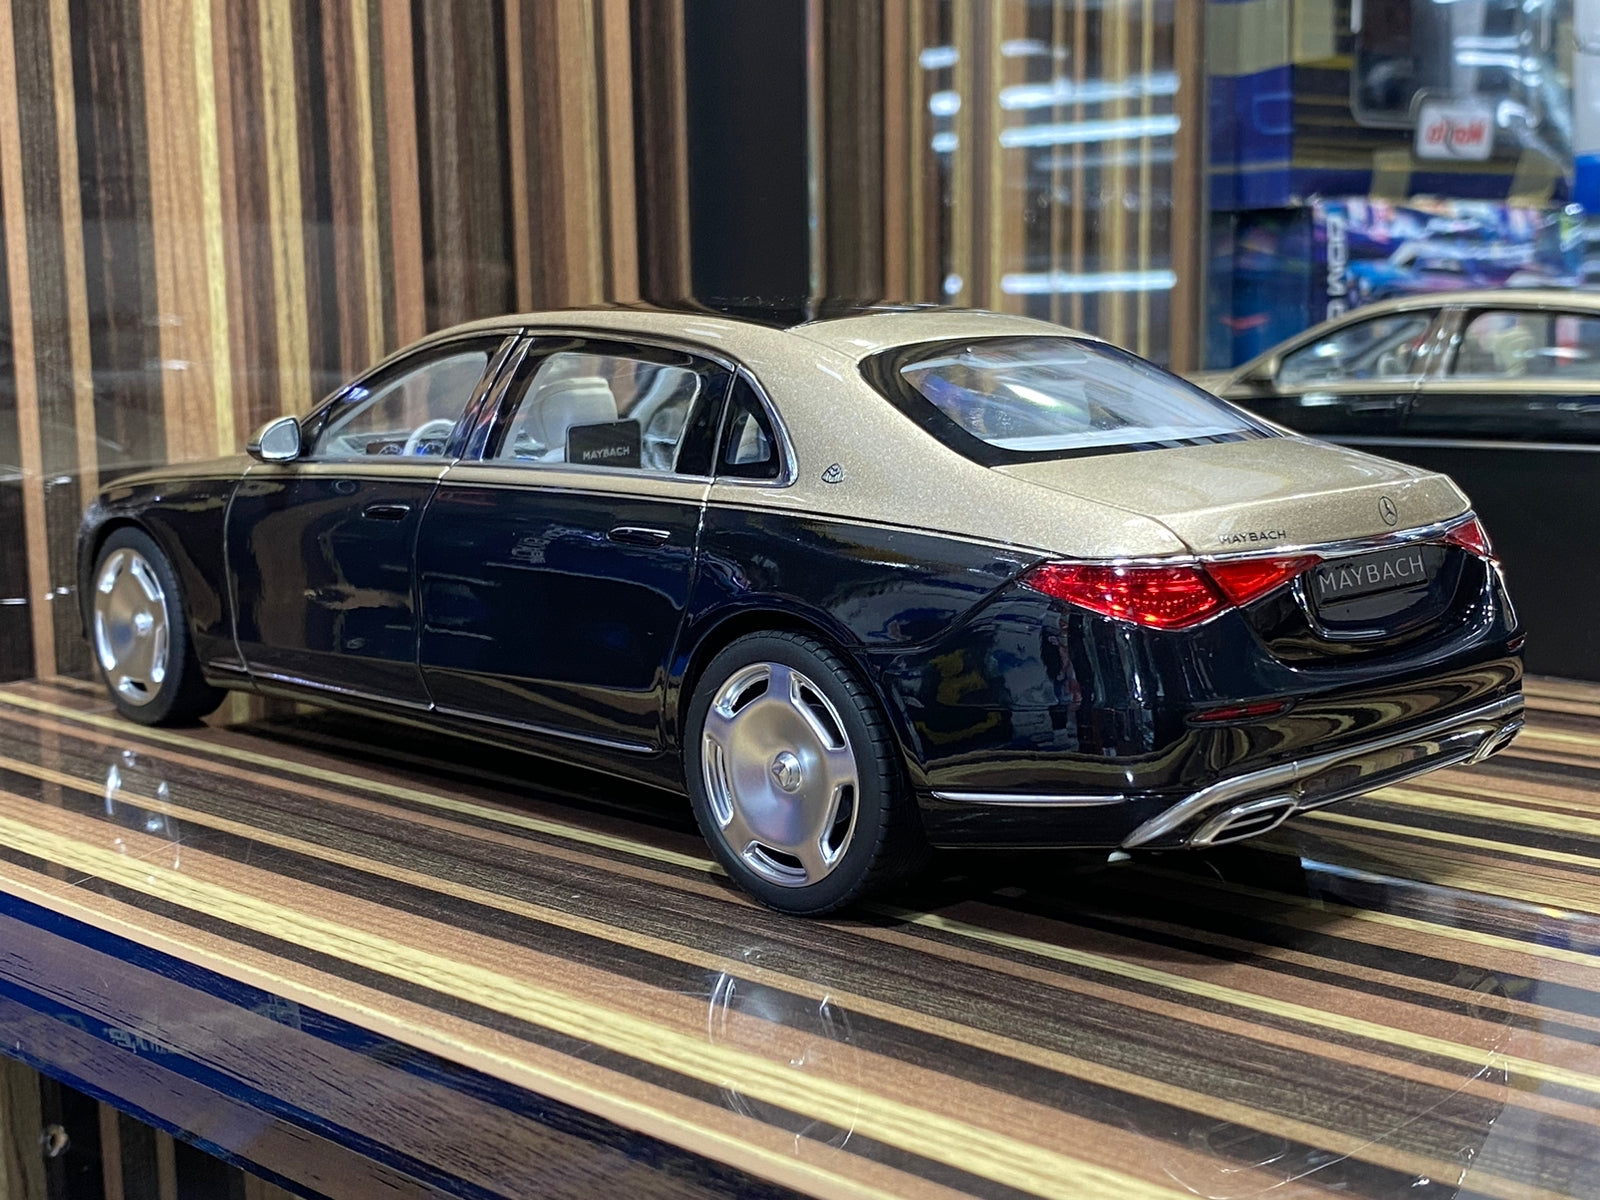 1/18 Diecast Mercedes-Maybach S-Class 2021 Black & Gold Norev Scale Model Car